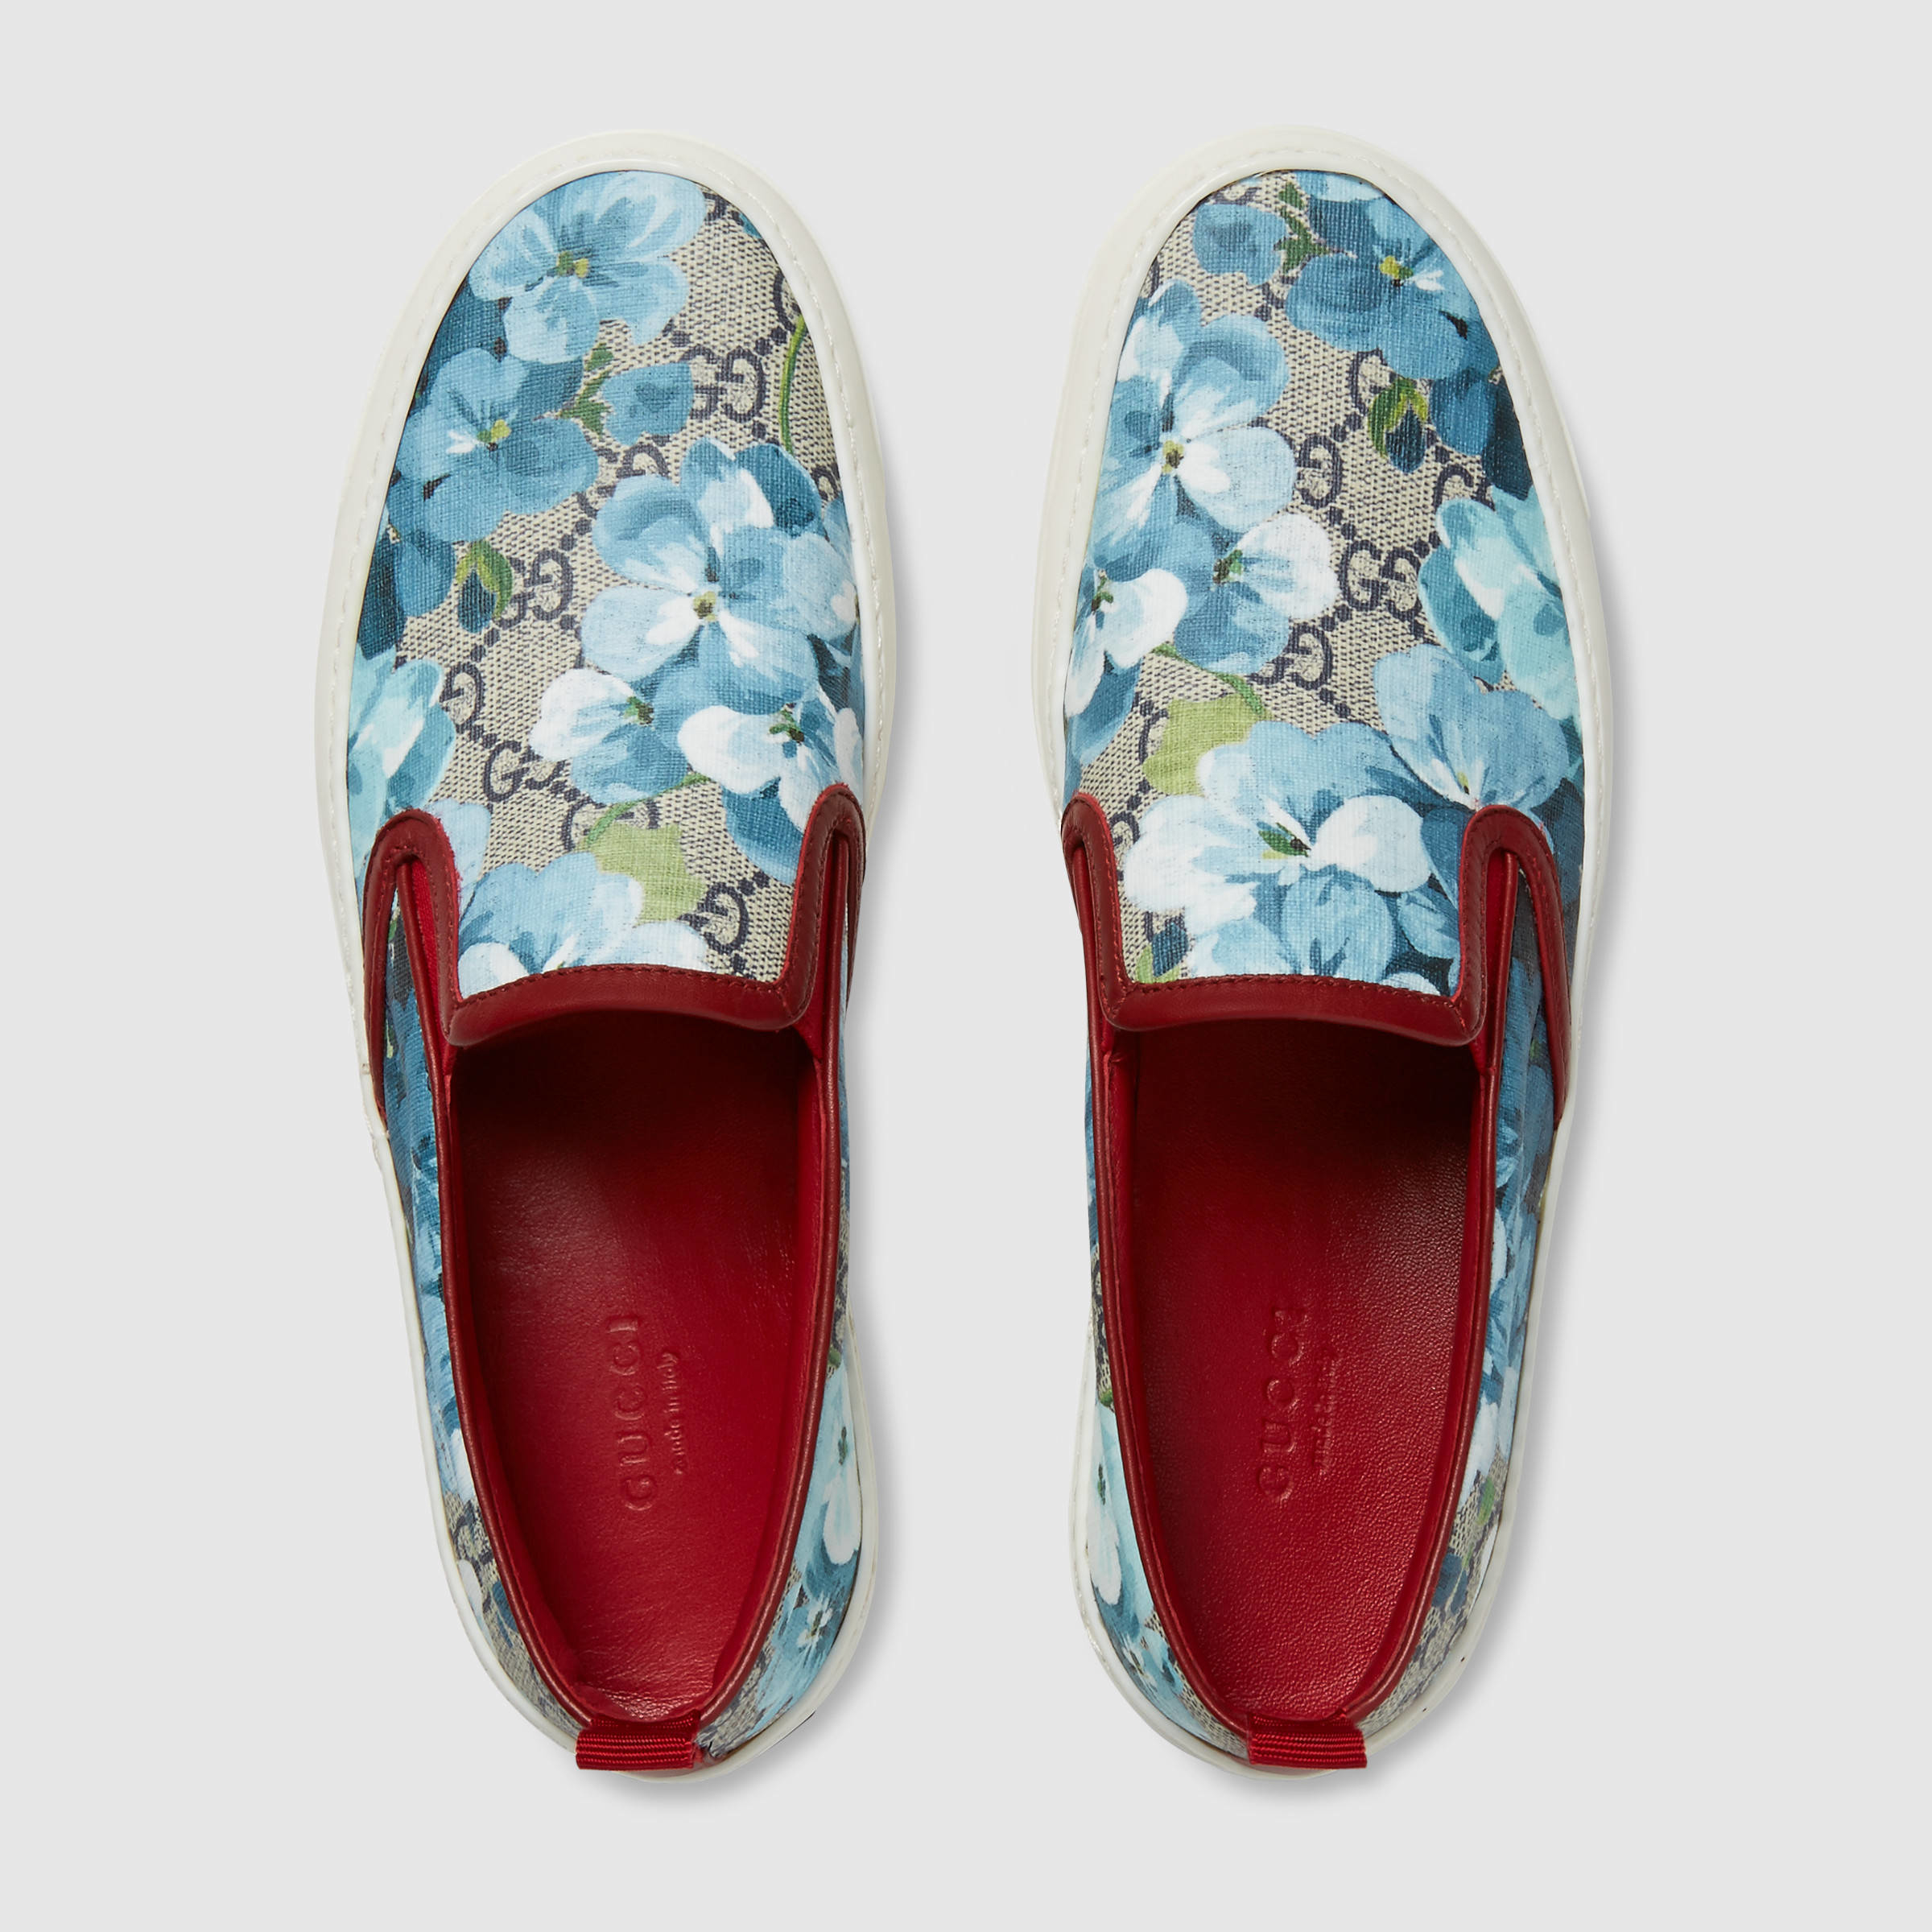 Lyst - Gucci Gg Supreme Blooms Slip-on